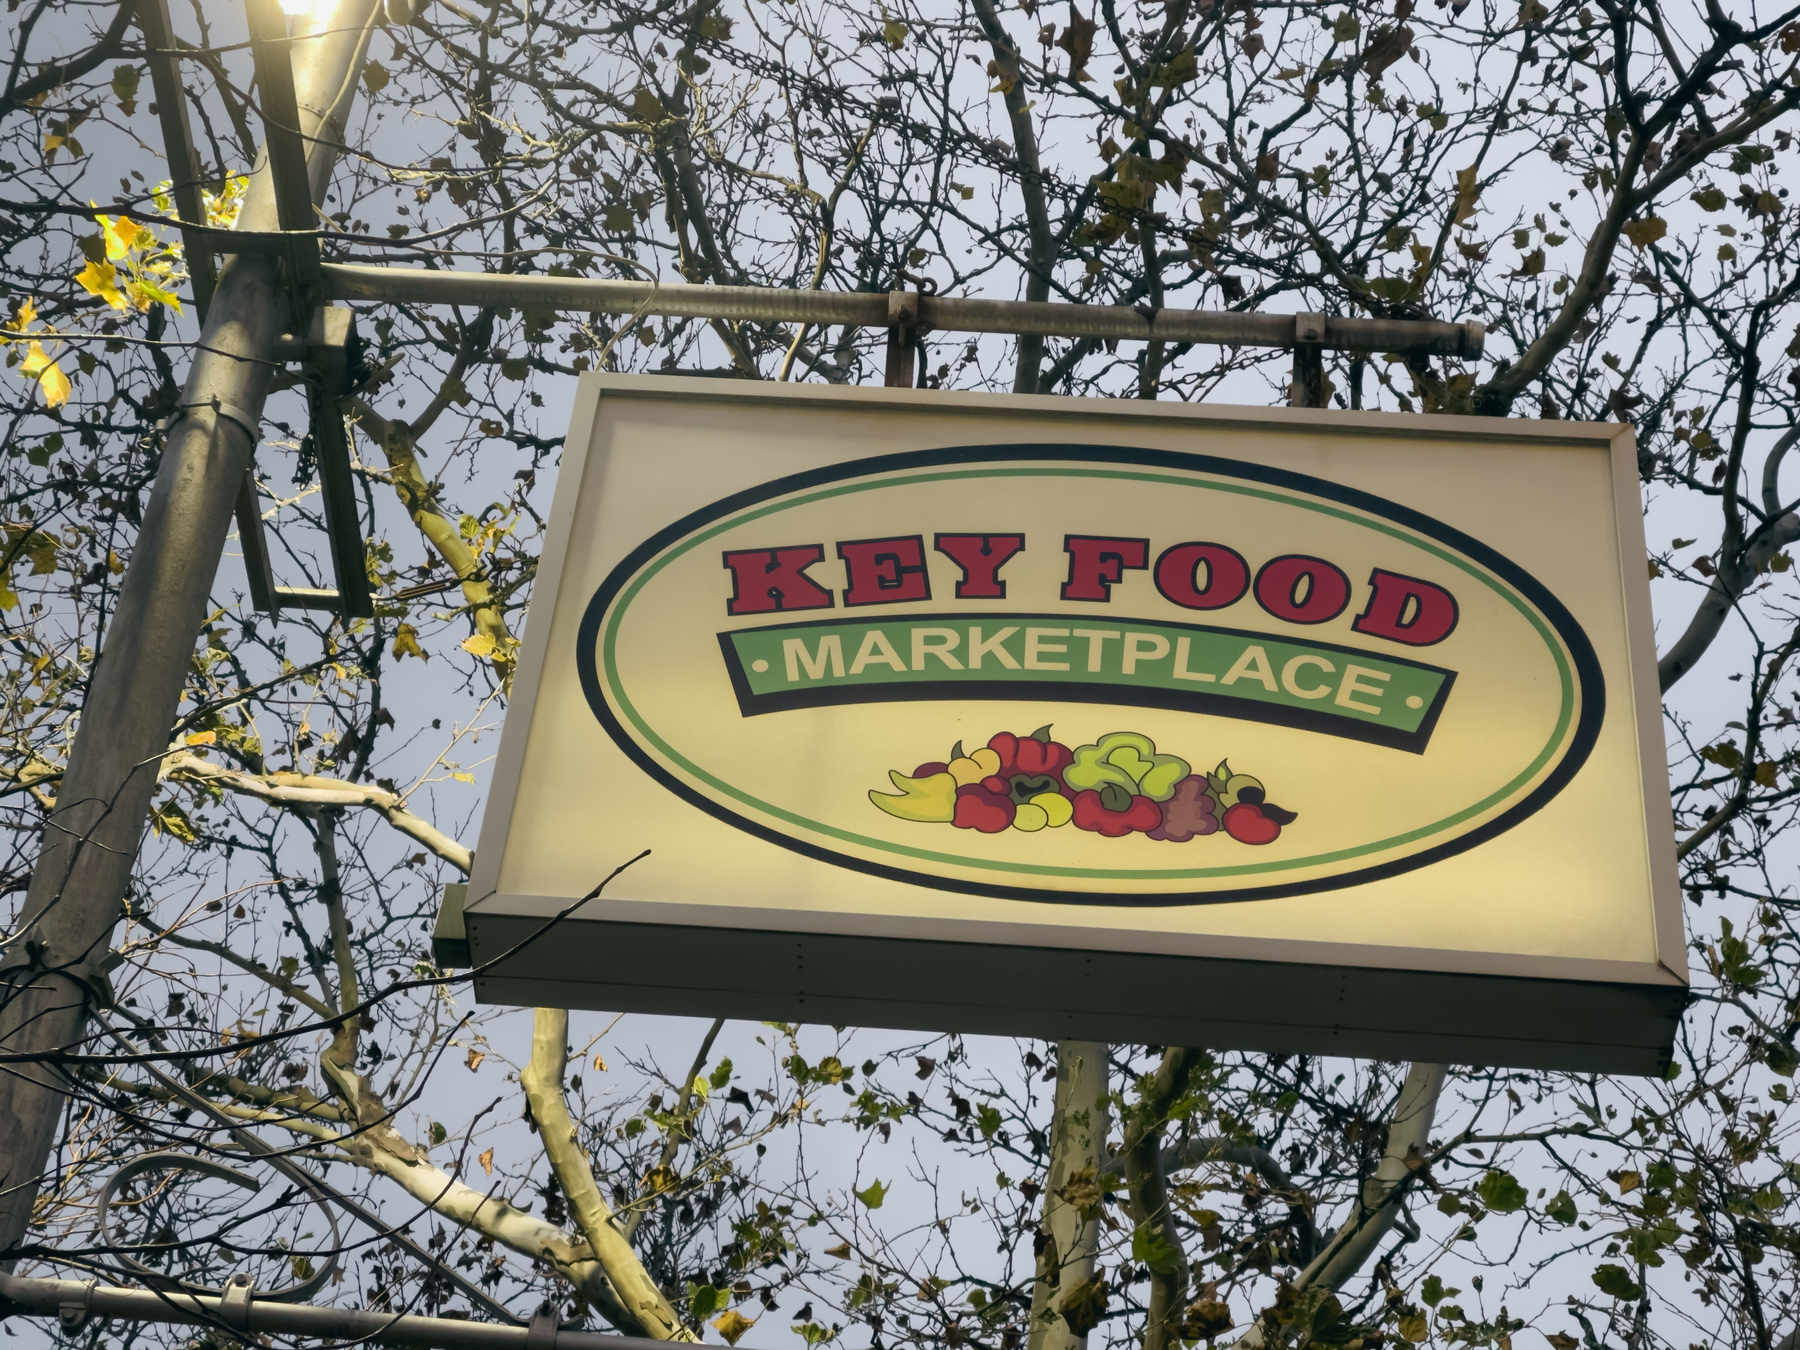 Key Food Marketplace sign hanging from utility pole with tree branches in background.